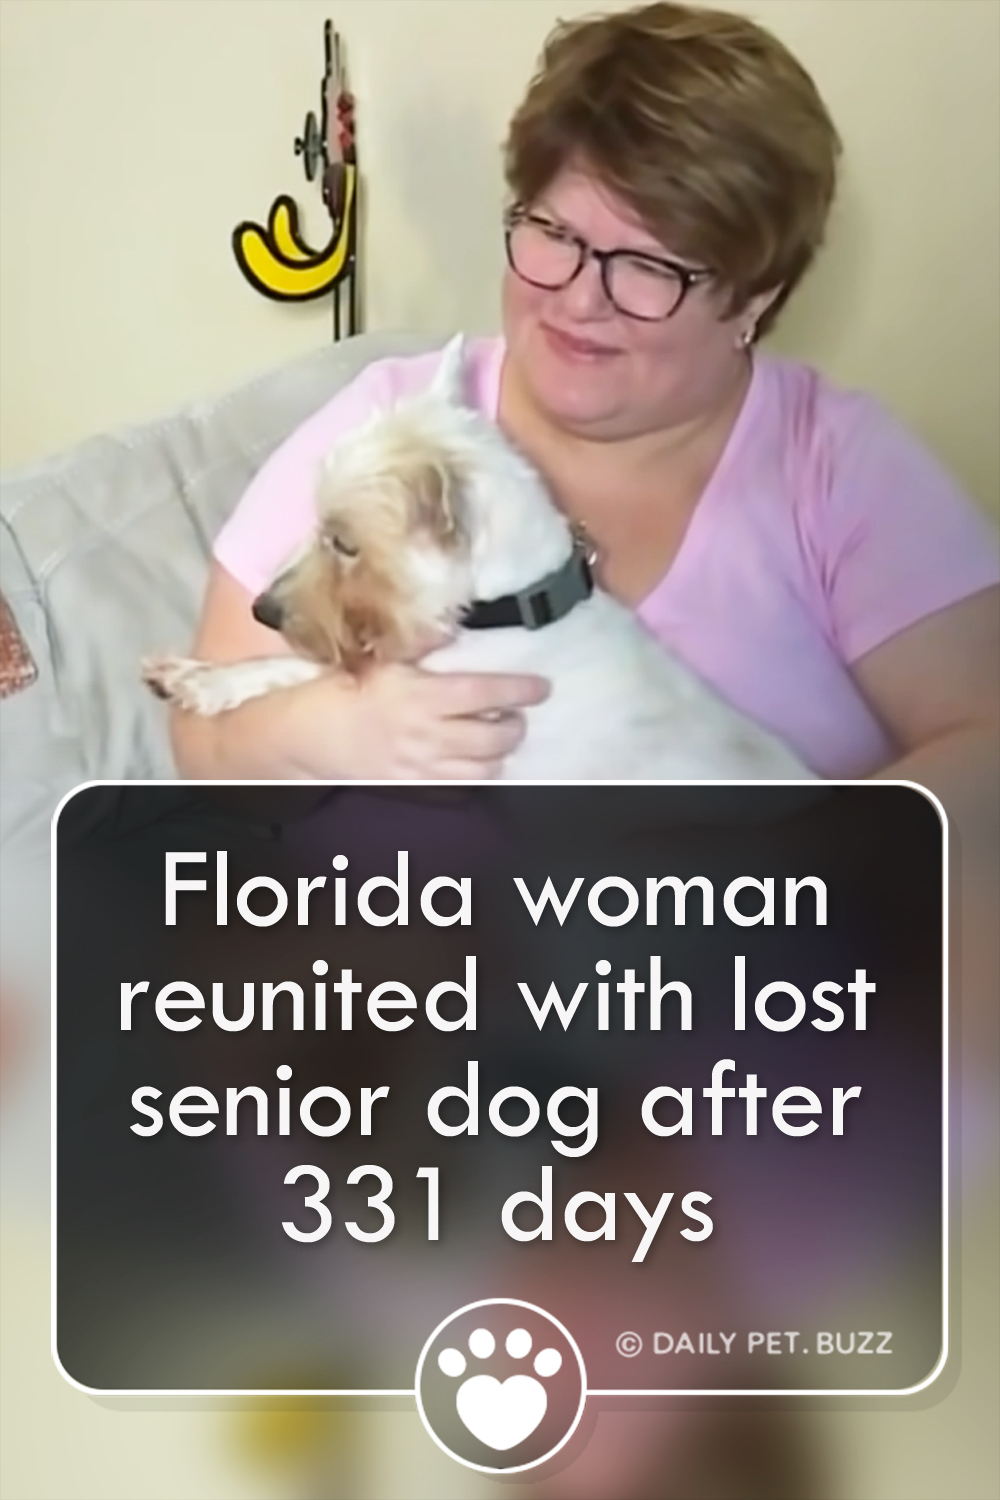 Florida woman reunited with lost senior dog after 331 days